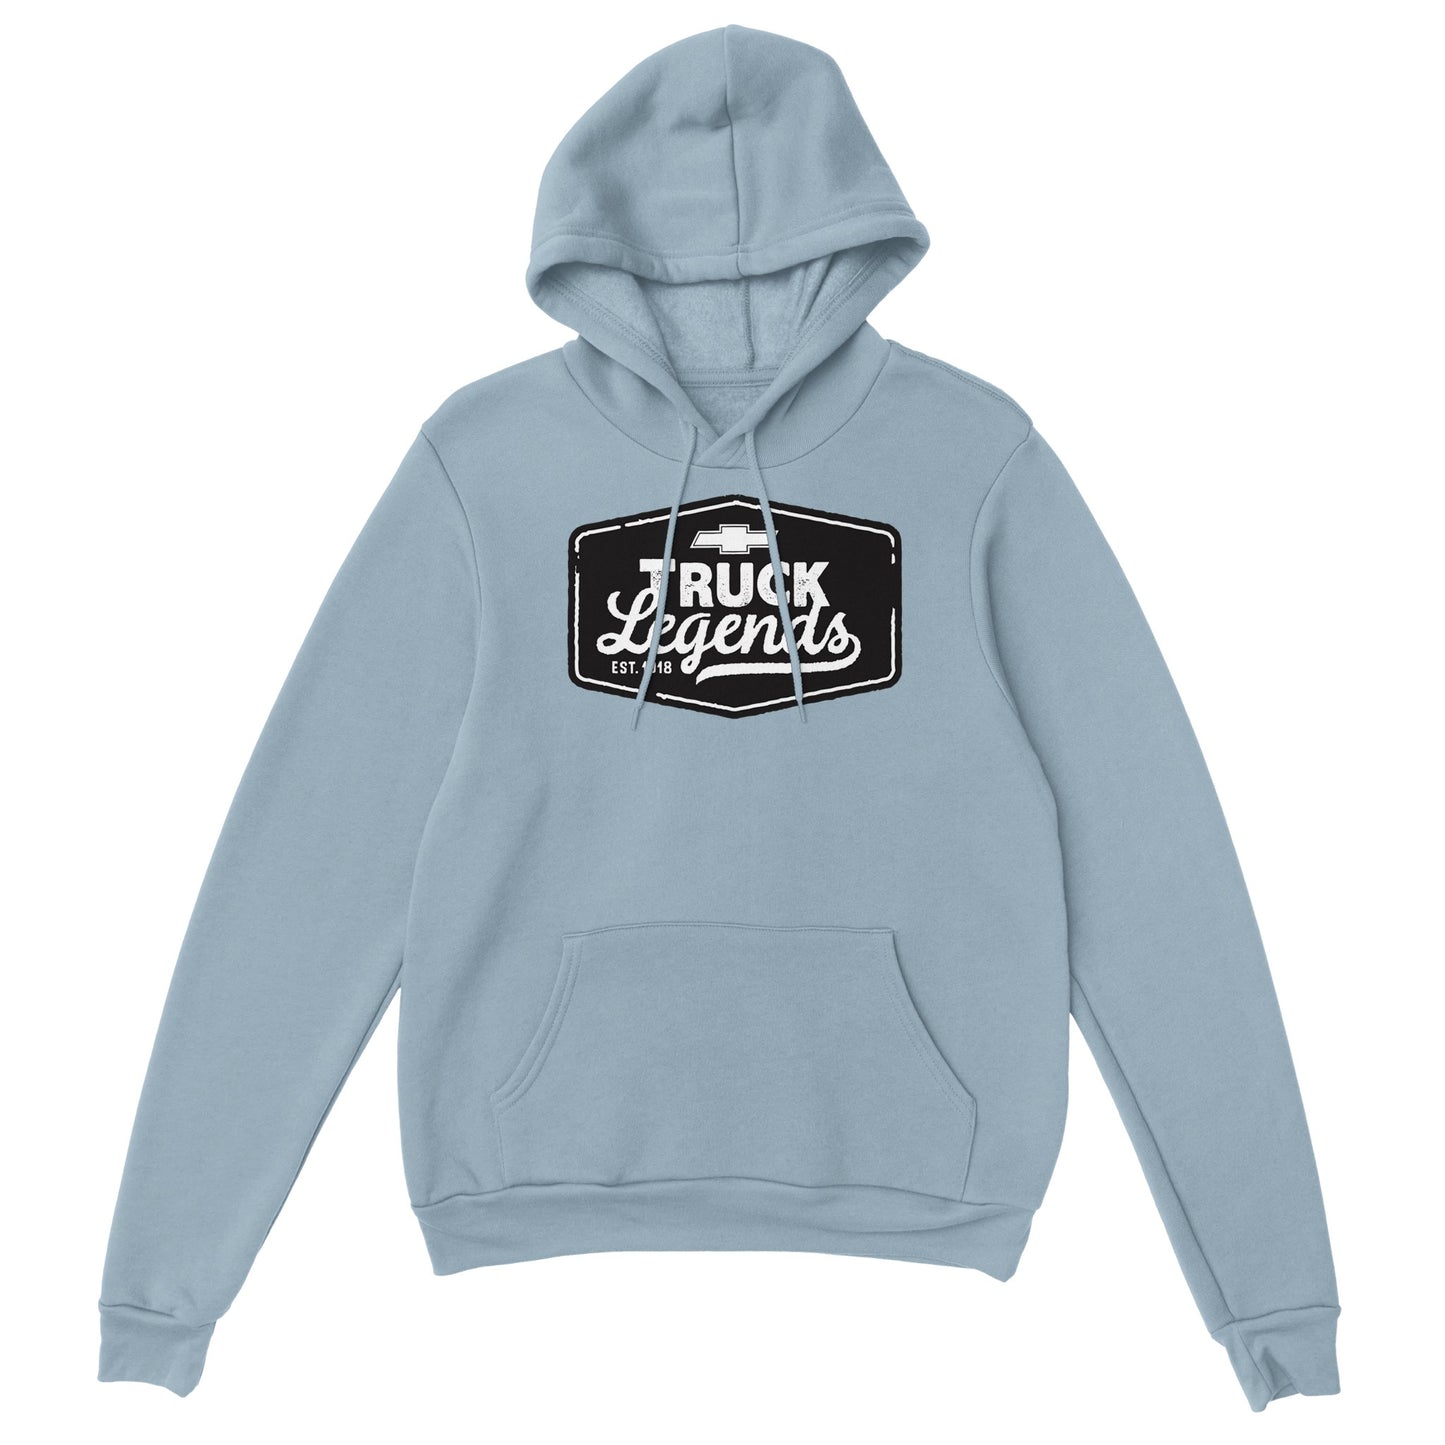 Chevy Truck Legends Pullover Hoodie - Mister Snarky's